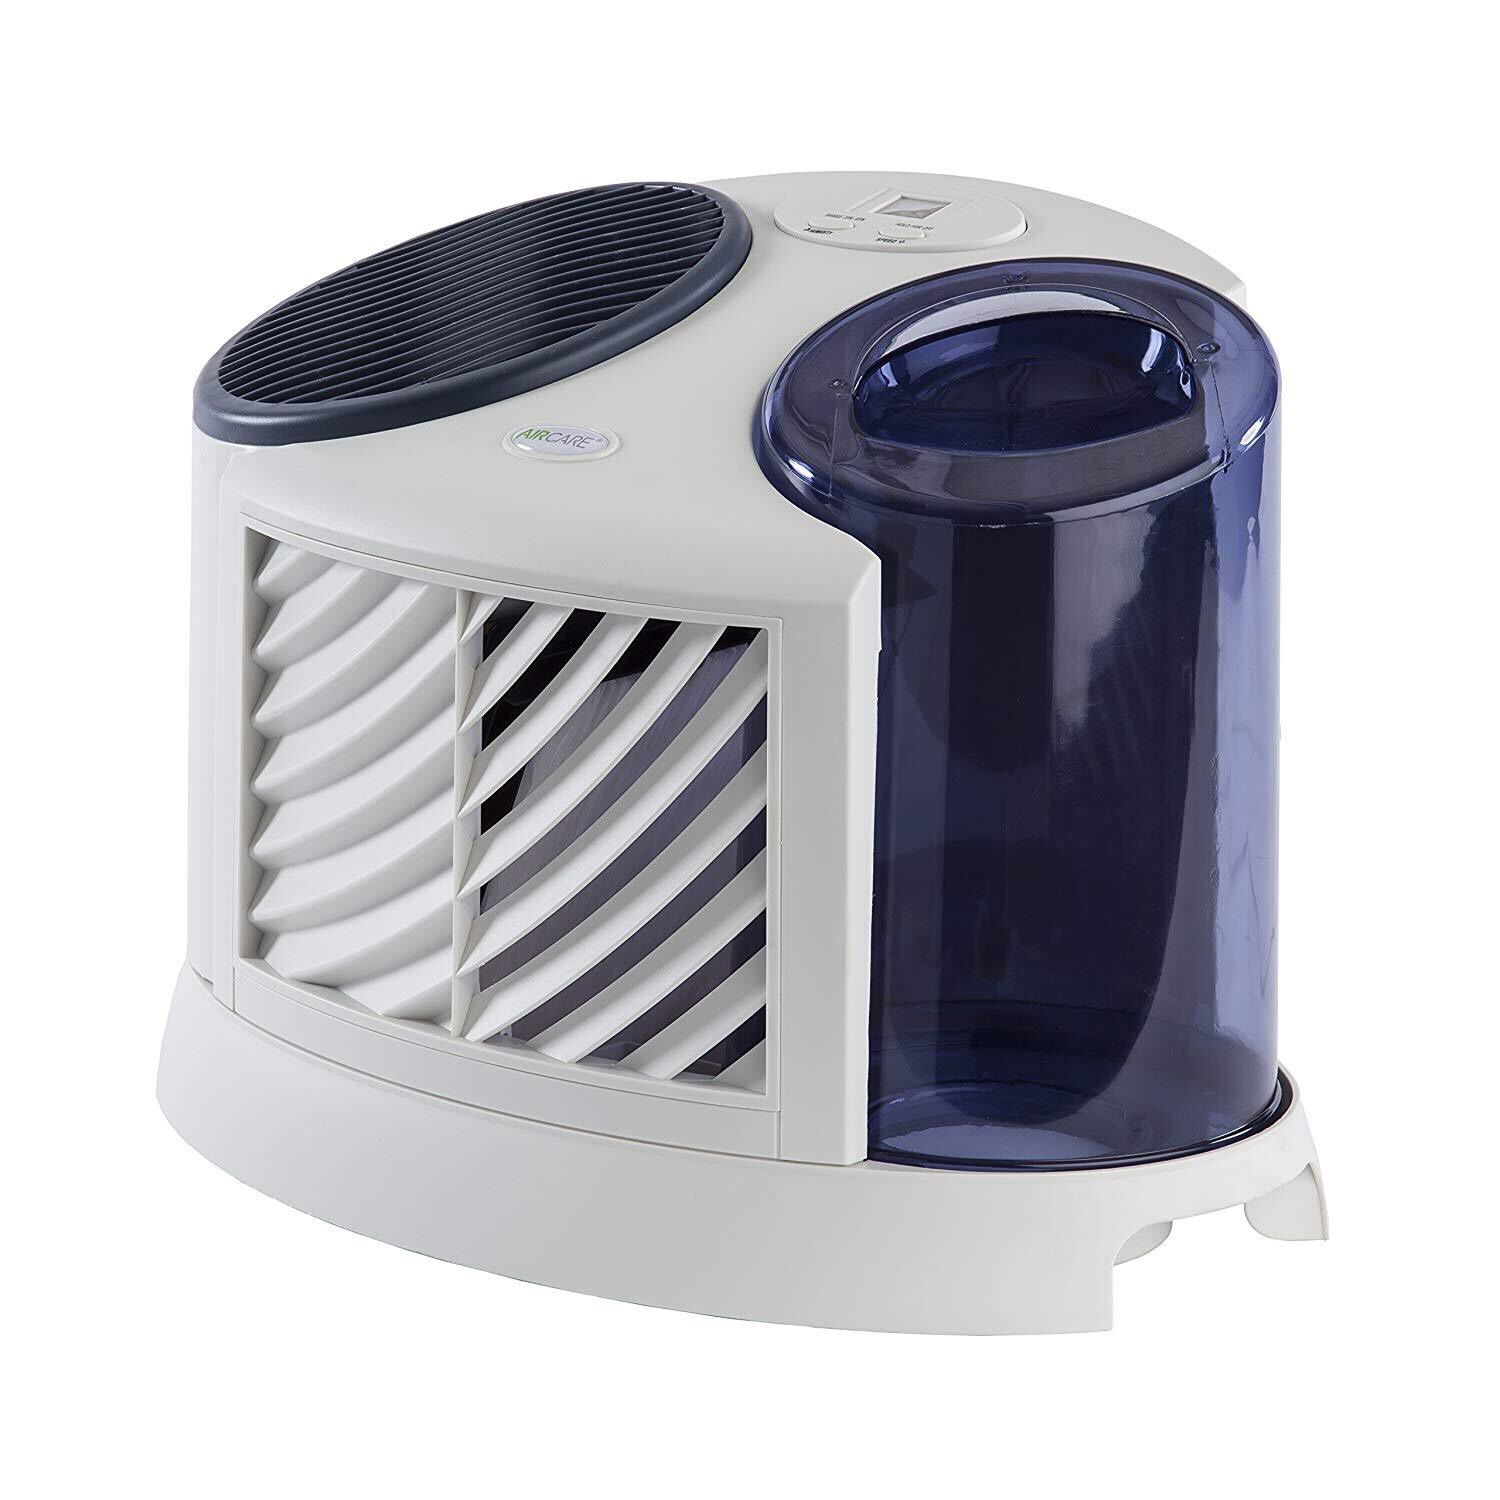 AIRCARE Tabletop Humidifier 7D6100